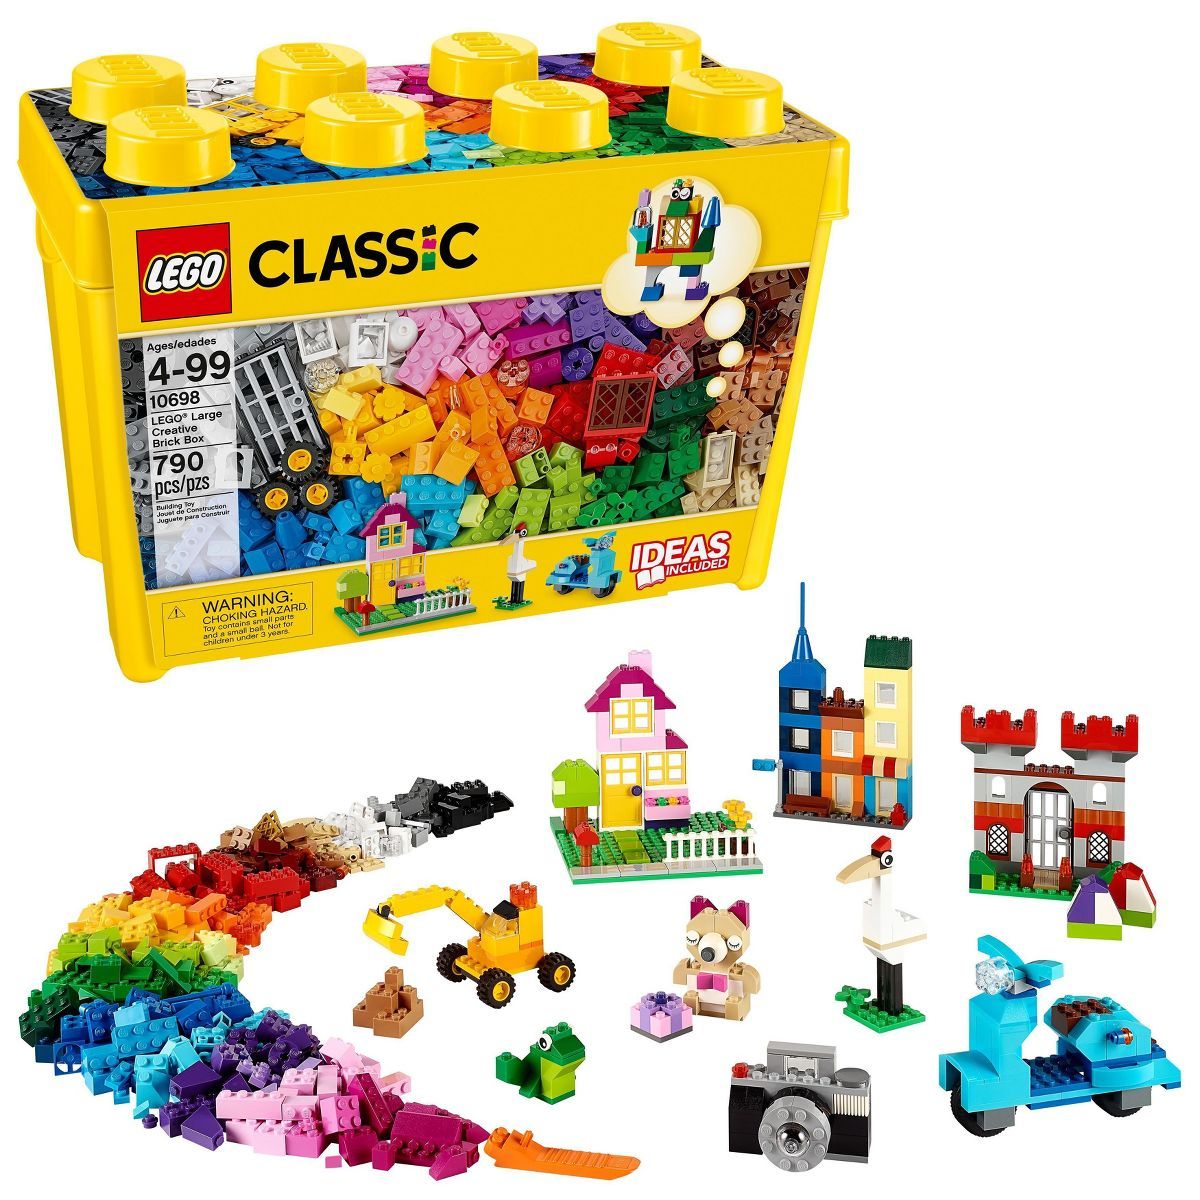 LEGO Classic Large Creative Brick Box Build Your Own Creative Toys, Kids Building Kit 10698 | Target